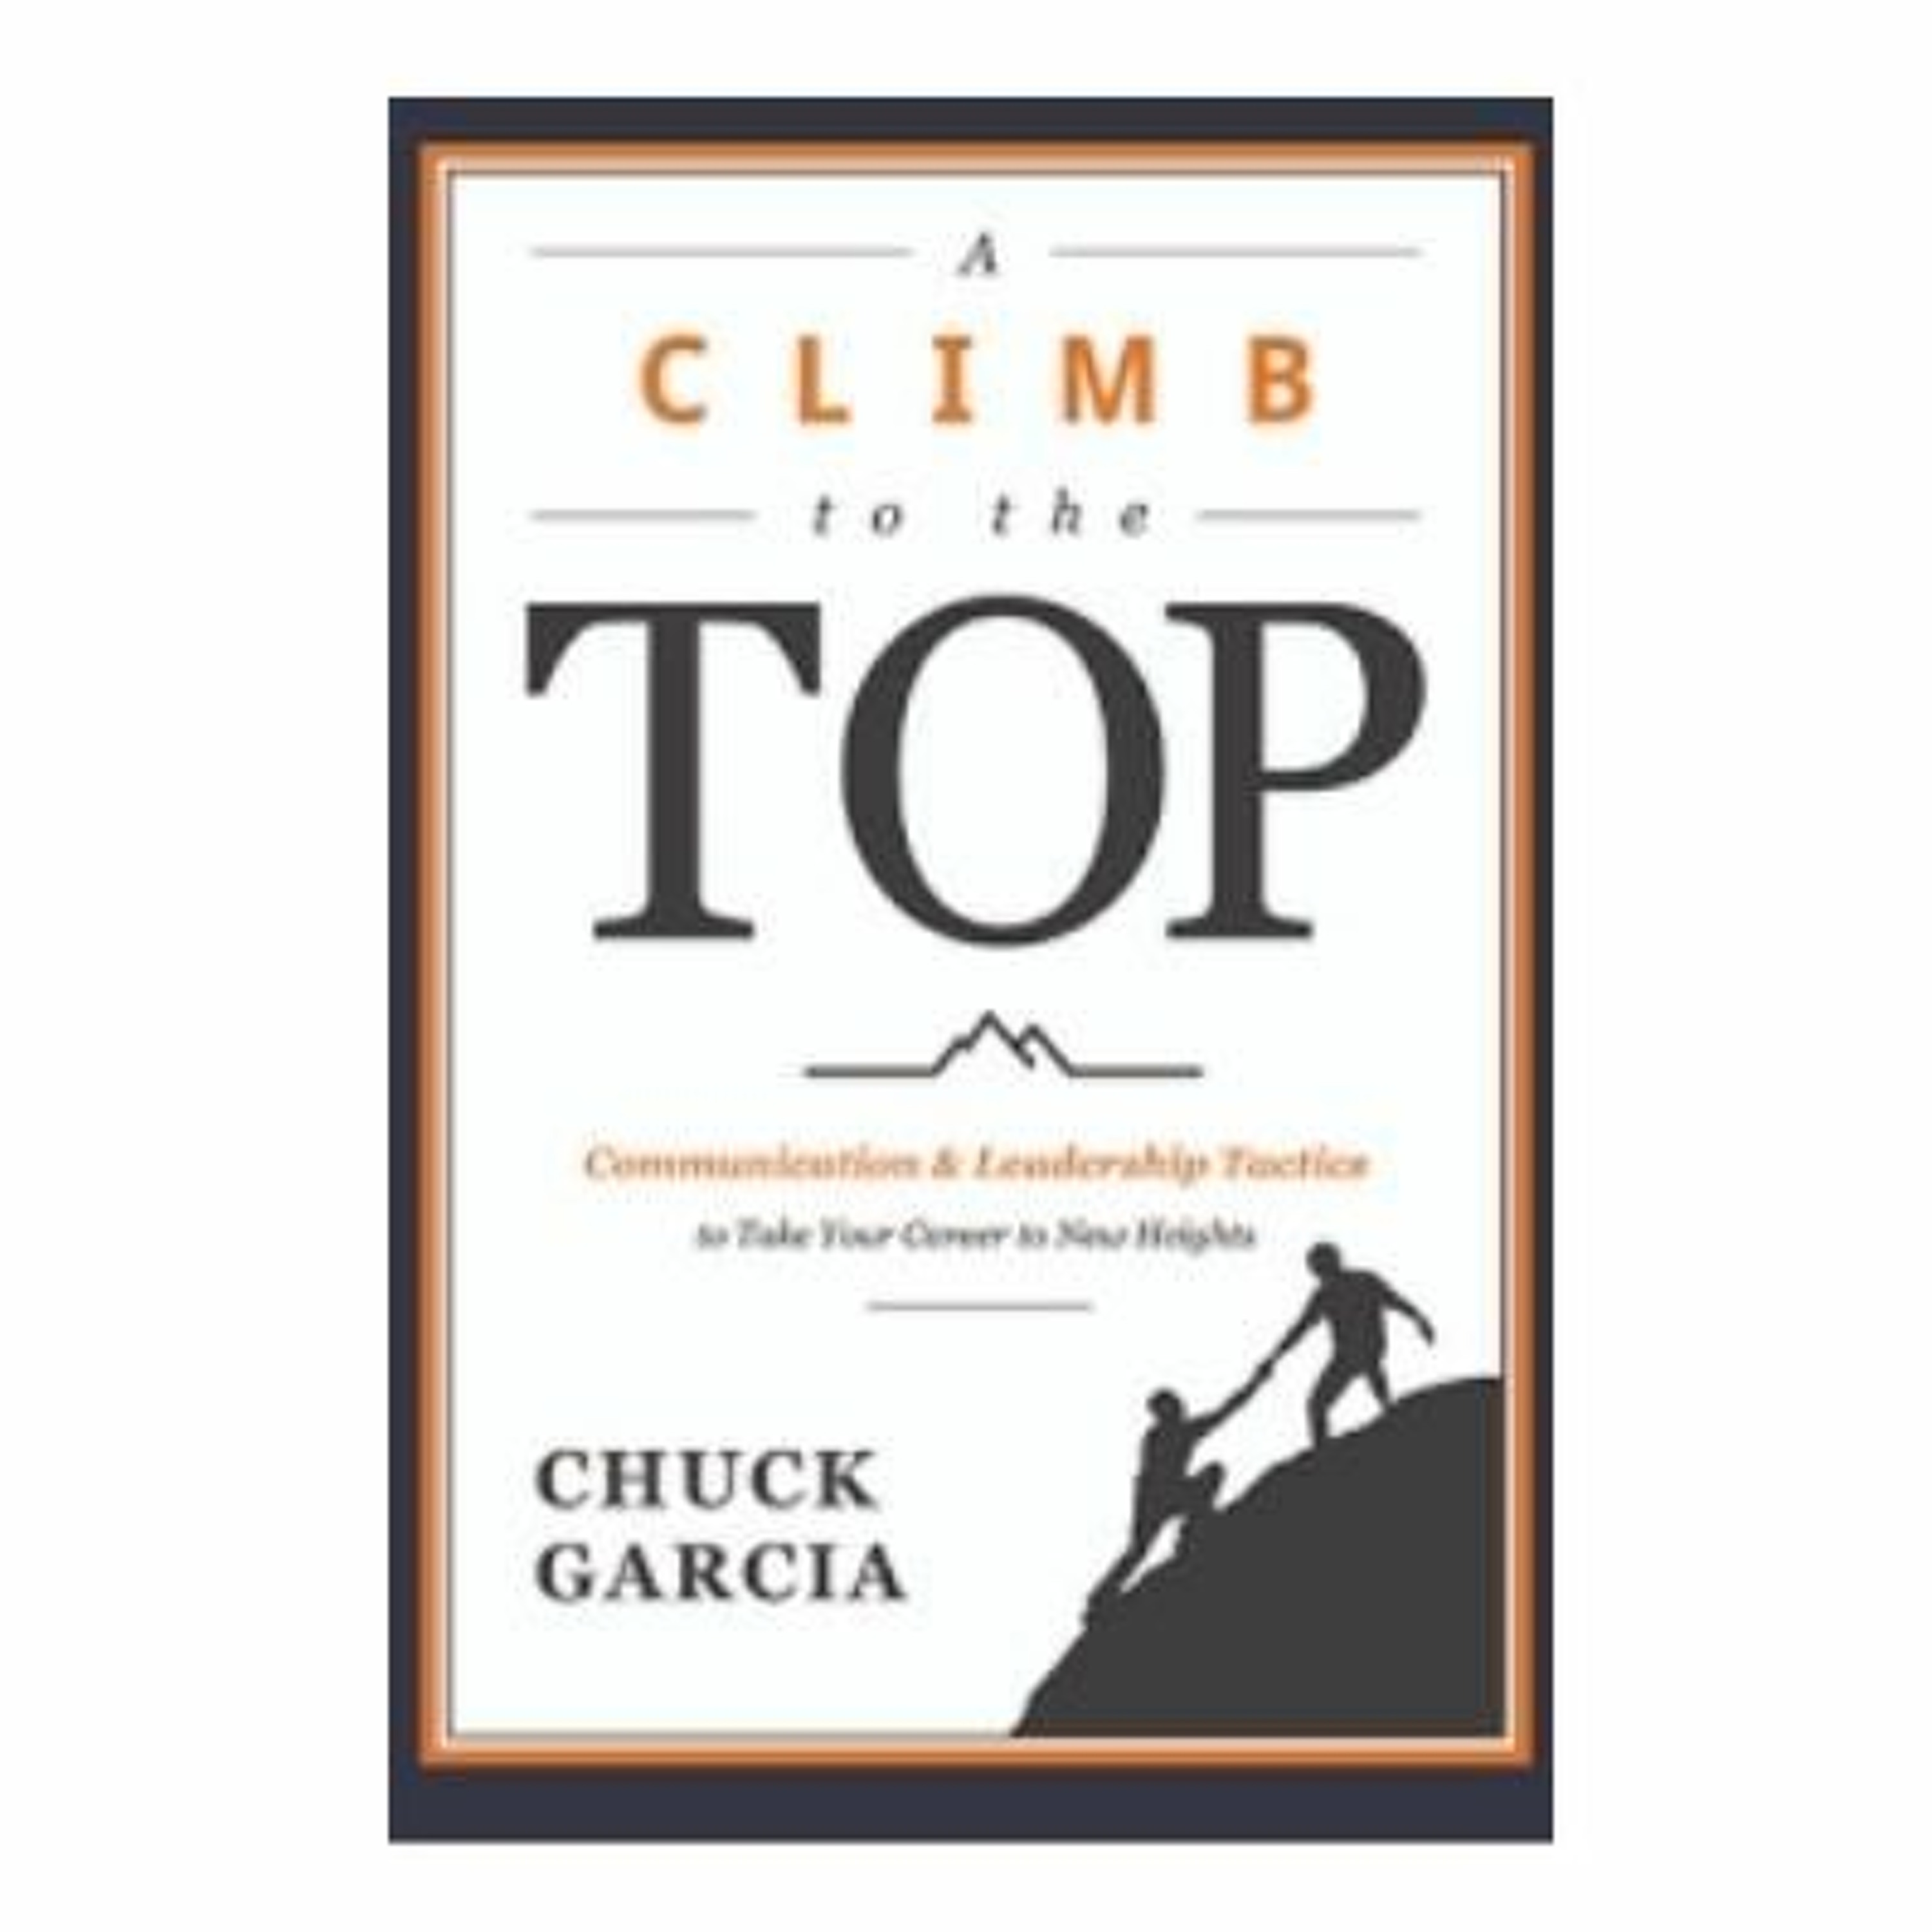 Podcast 941: A Climb to the Top with Chuck Garcia